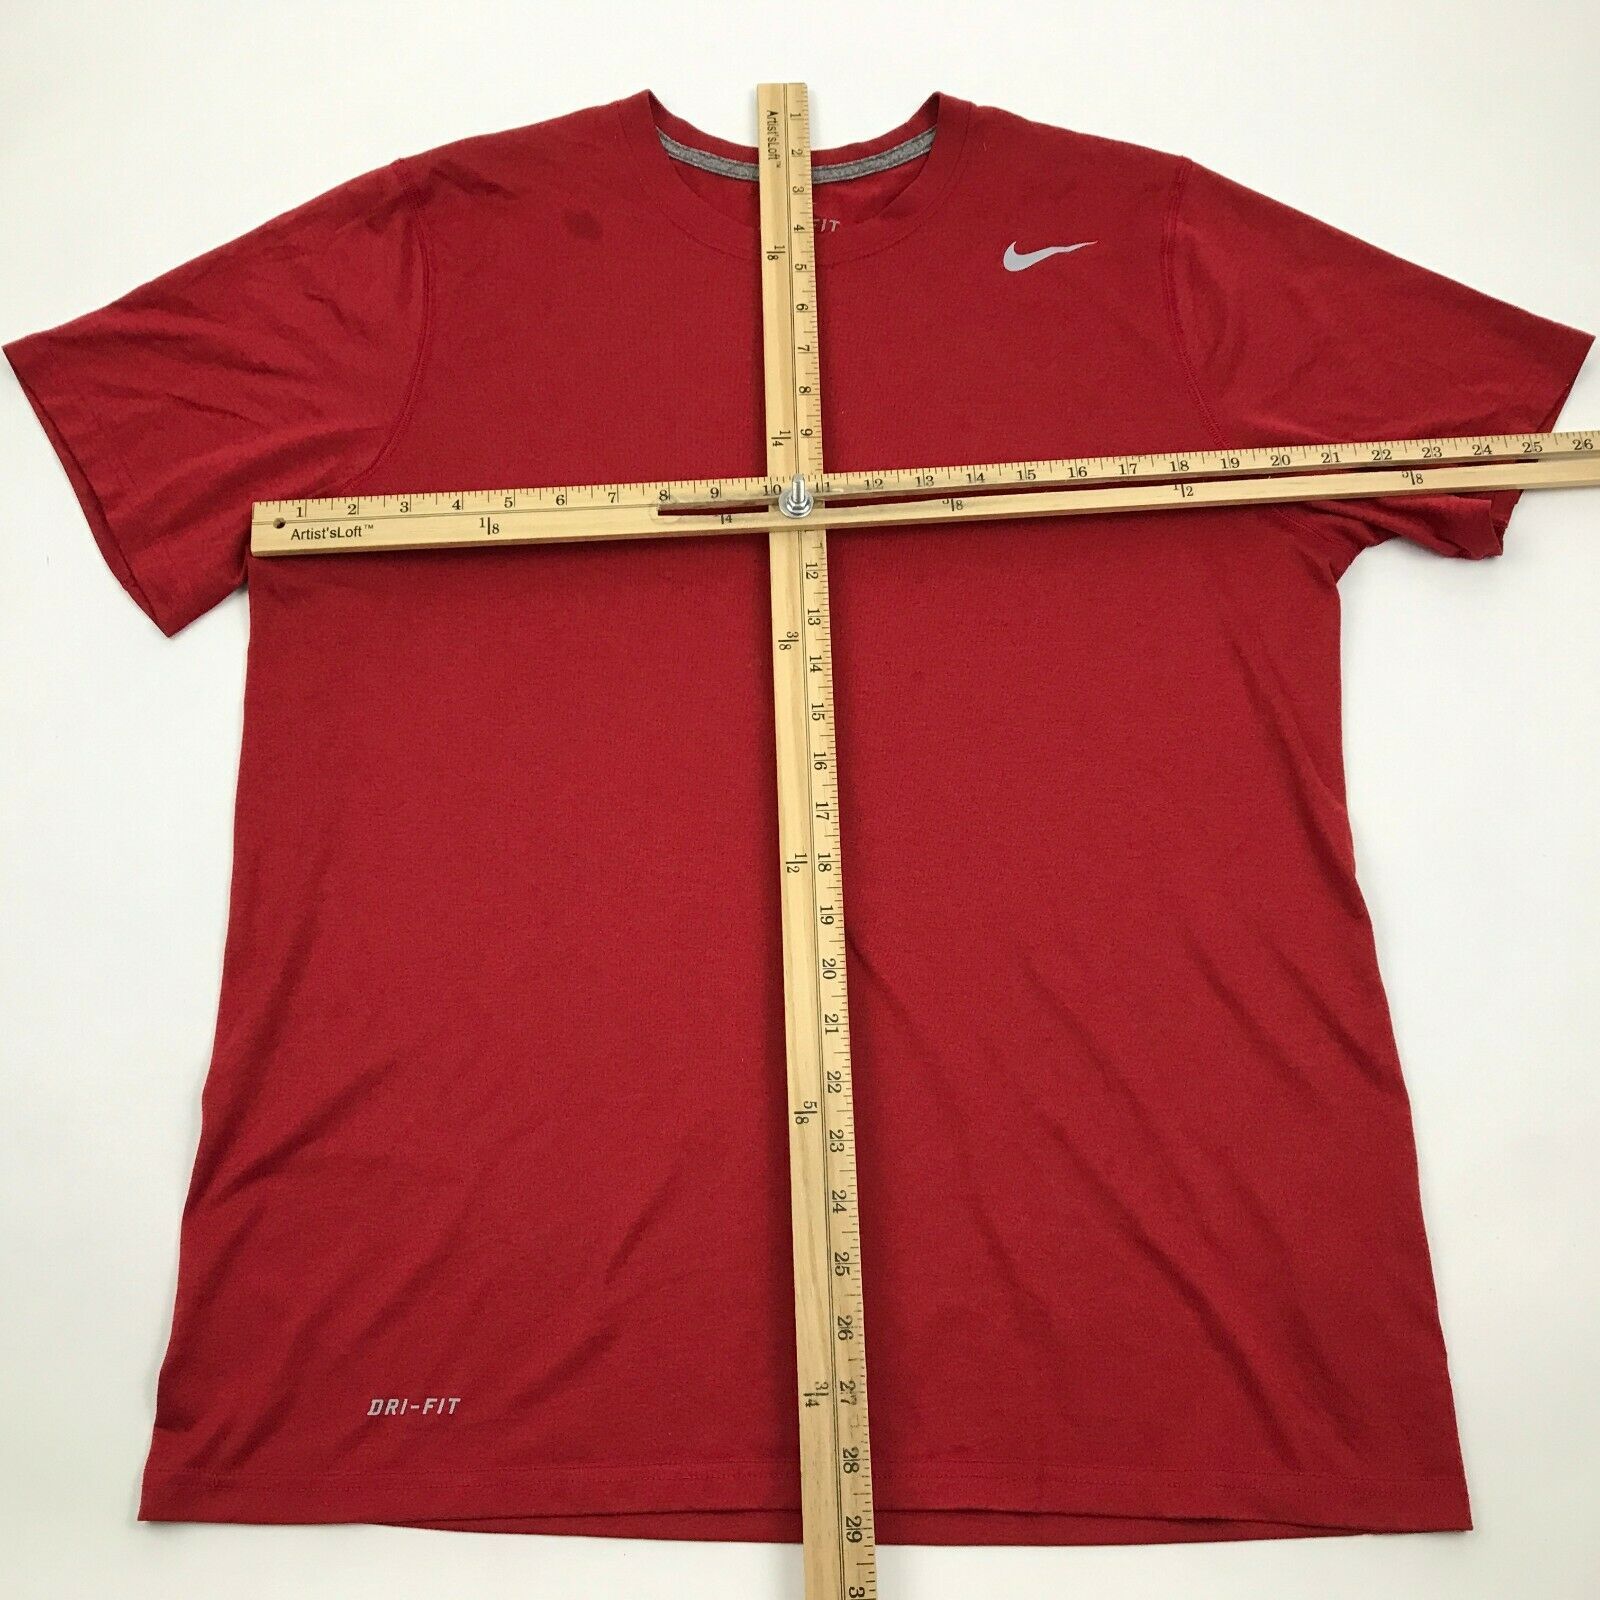 NIKE Dry Fit Shirt Men's Size Large L Red Short Sleeve Dri-FIT Workout ...